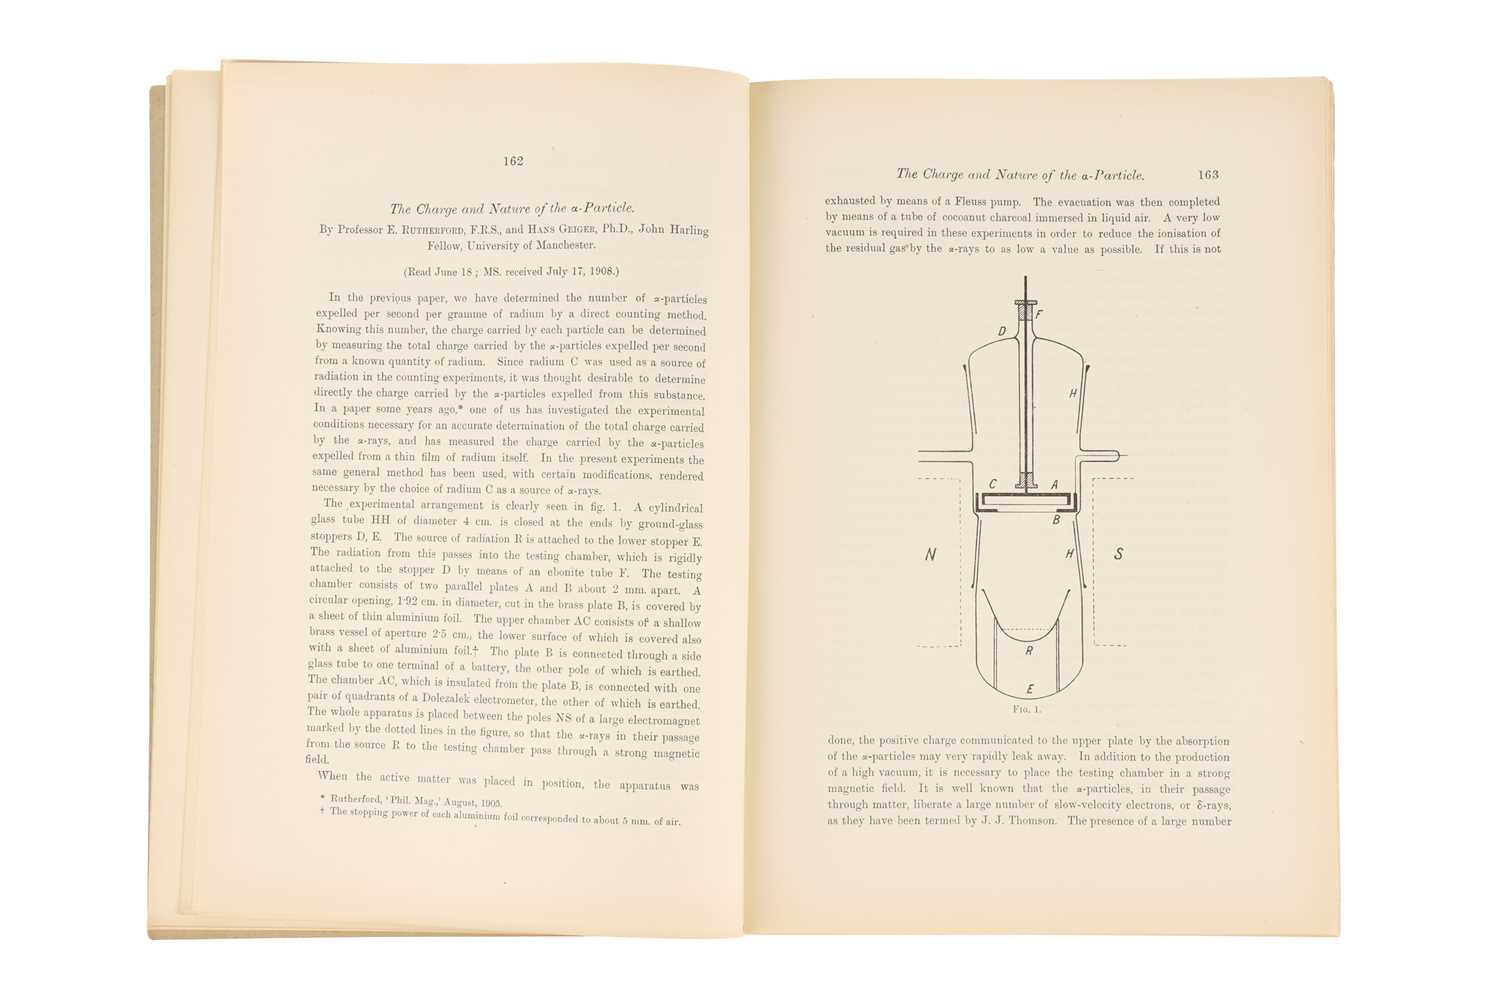 Lot 78 - Ernst Rutherford, Geiger, and Marsden, First Work on the Geiger Counter